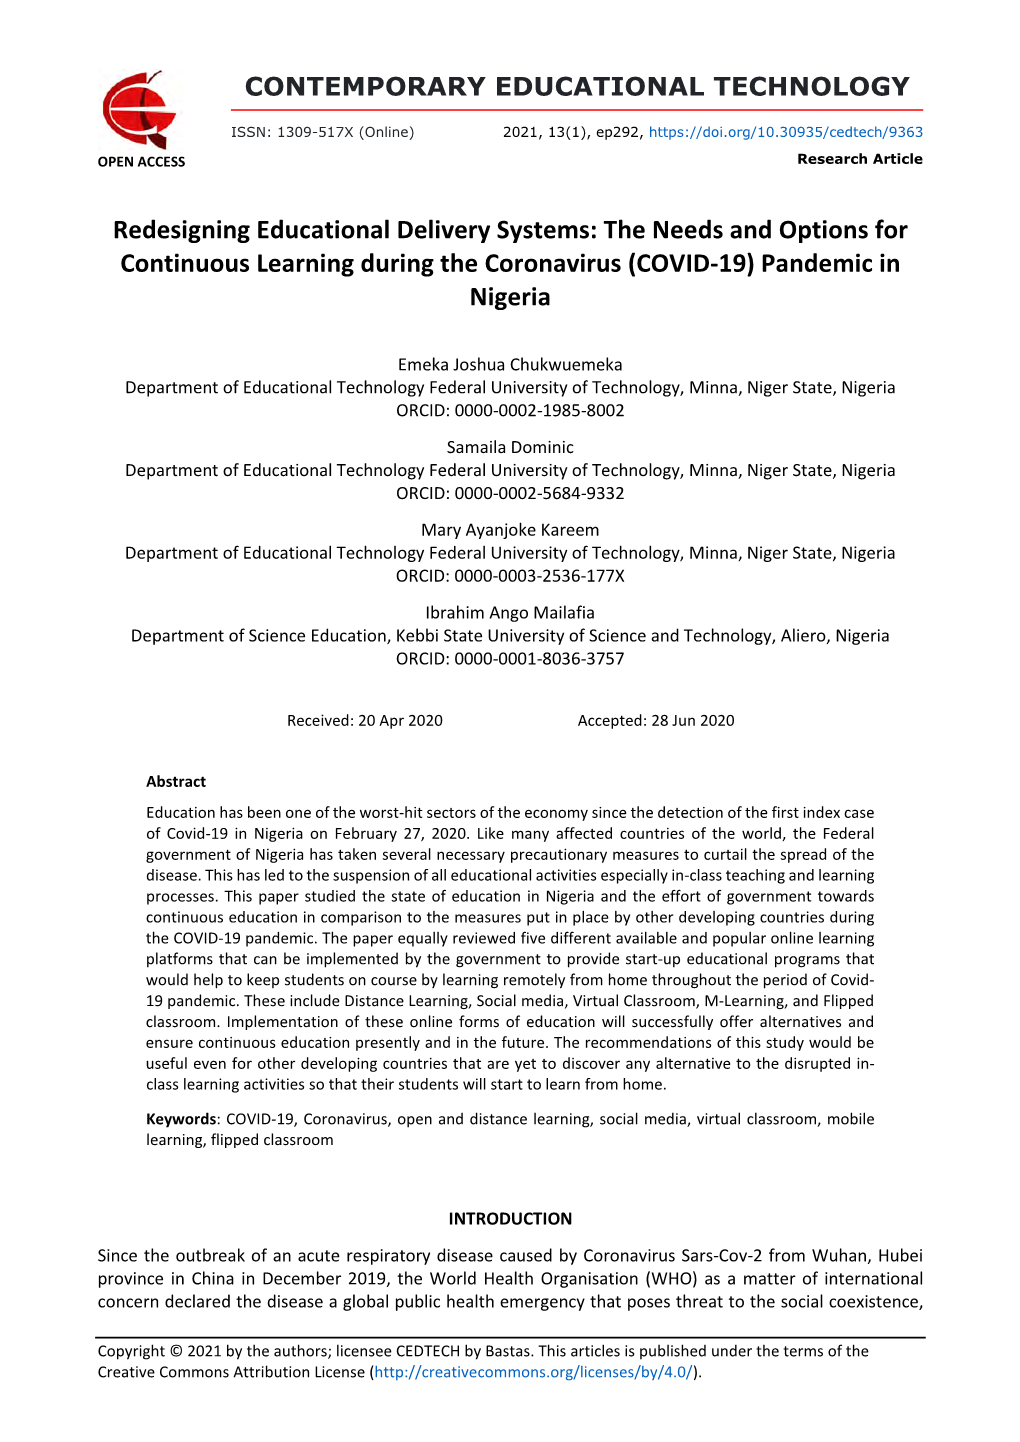 Redesigning Educational Delivery Systems: the Needs and Options for Continuous Learning During the Coronavirus (COVID-19) Pandemic in Nigeria